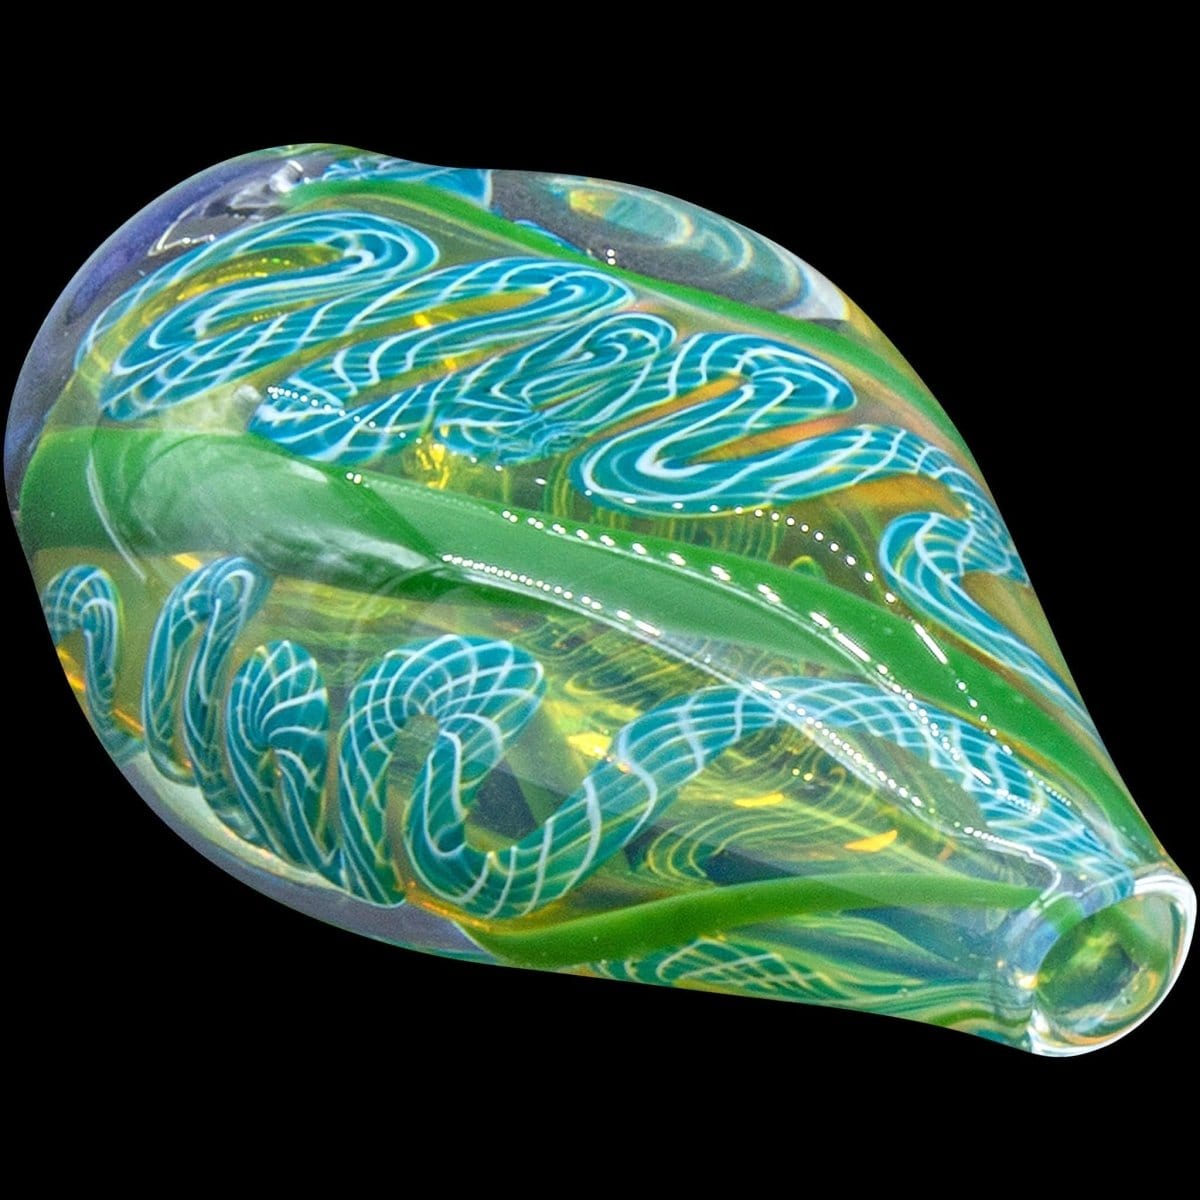 LA Pipes Hand Pipe "Skipping Stone" Inside-Out Chillum